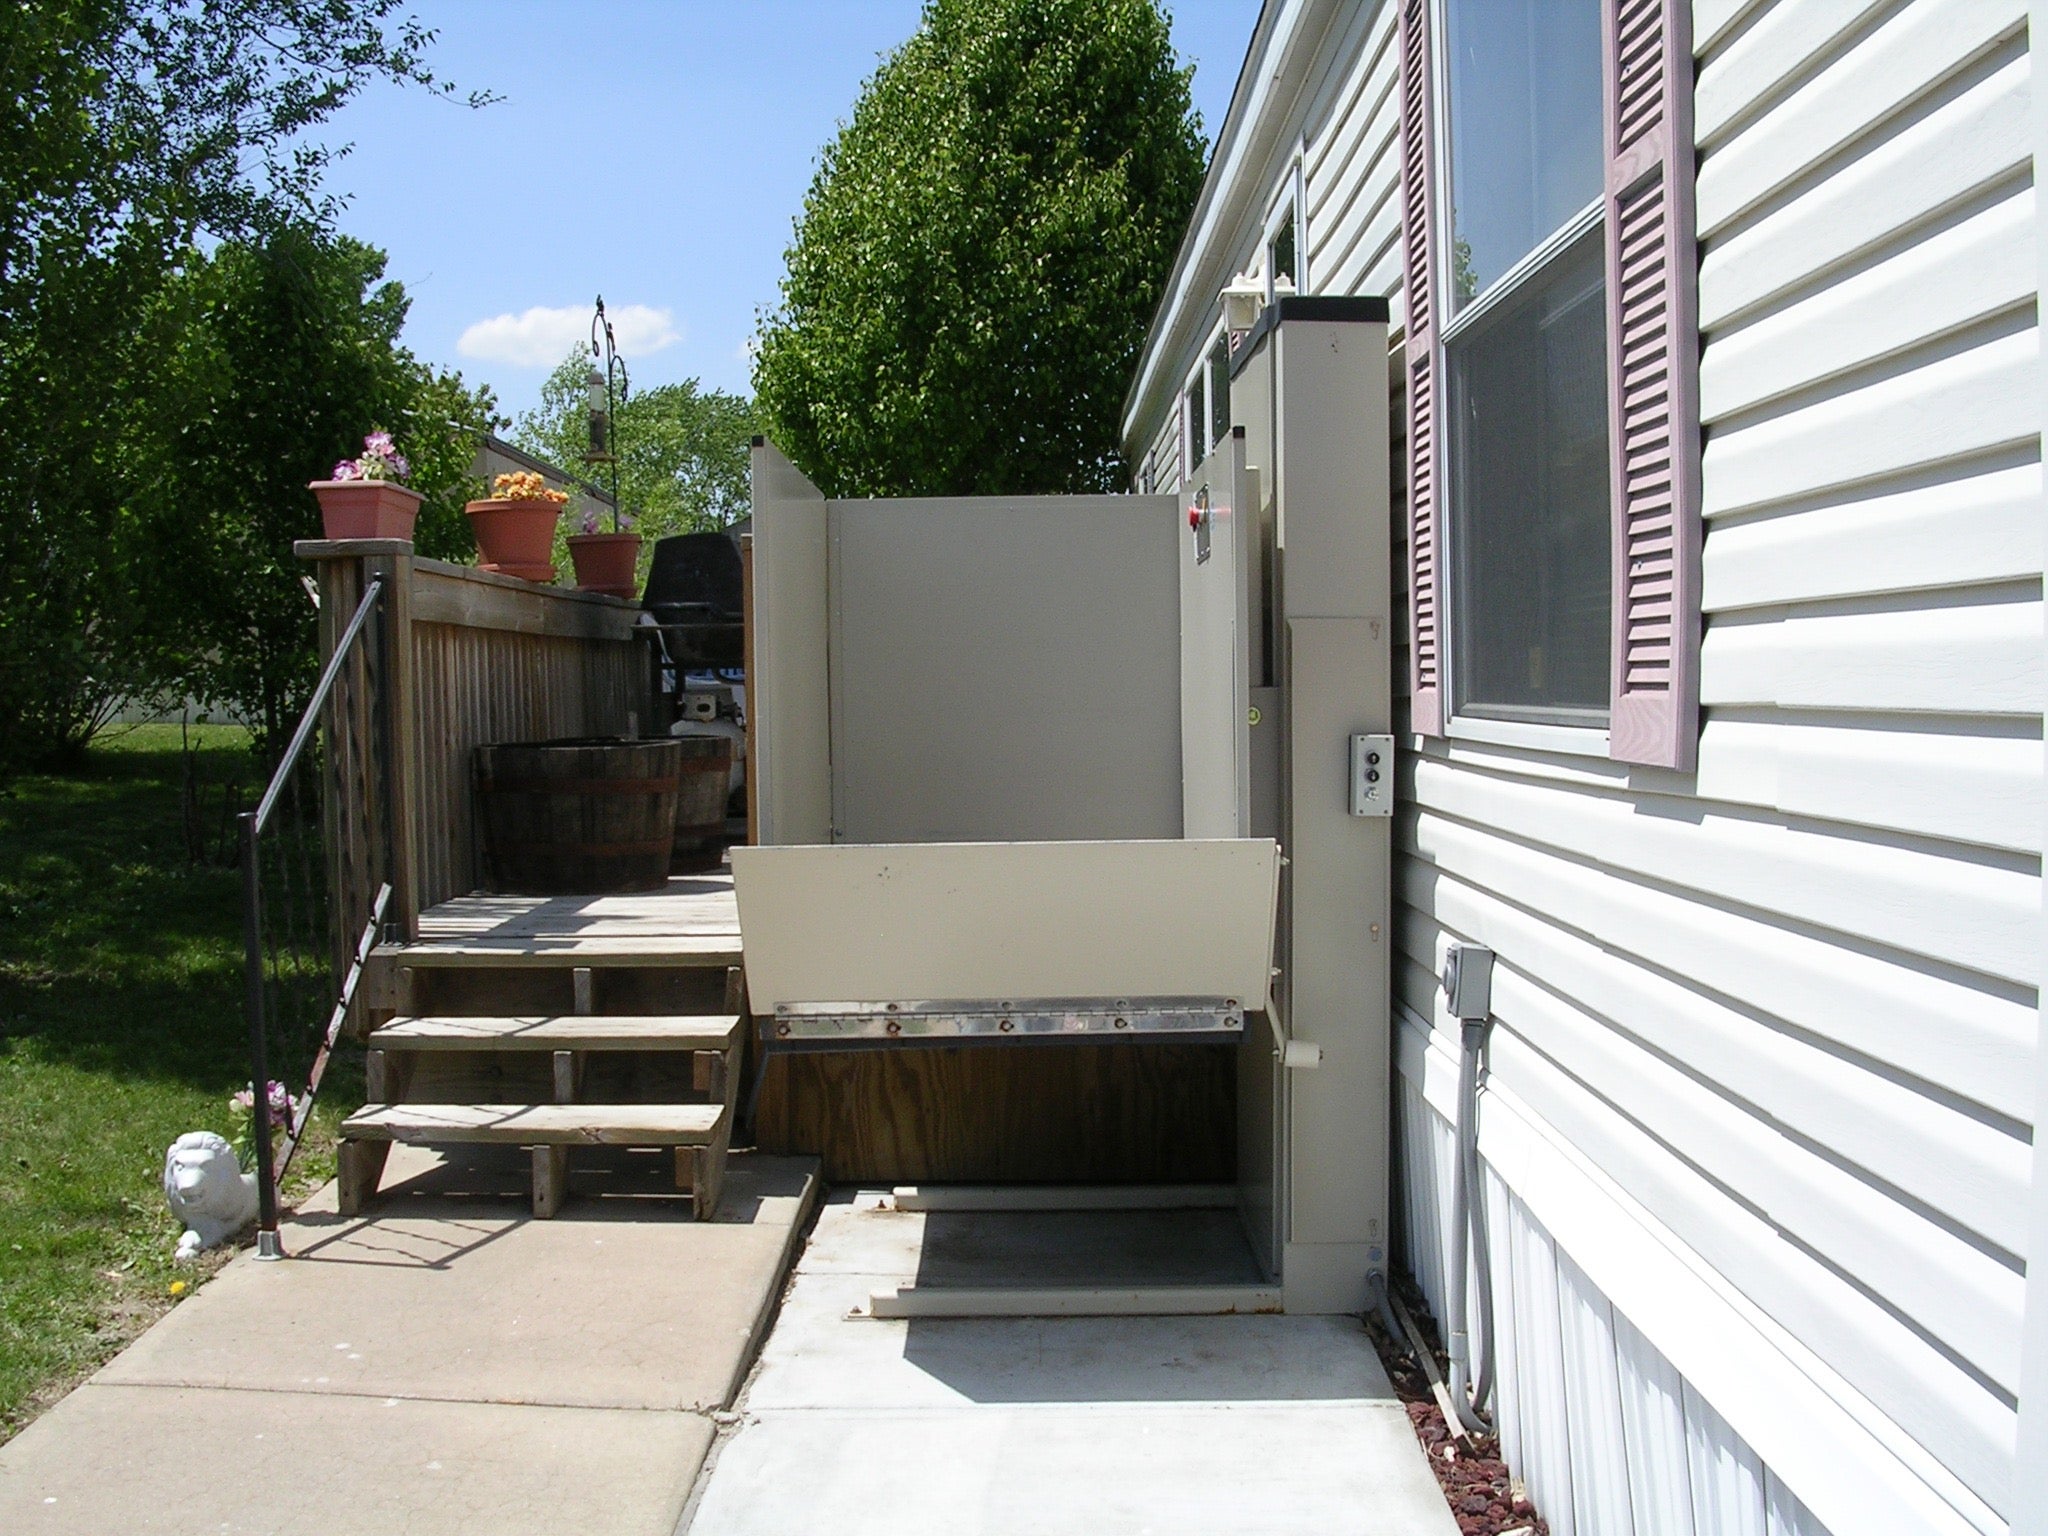 Mobile home with a wheelchair lift installed next to the steps.